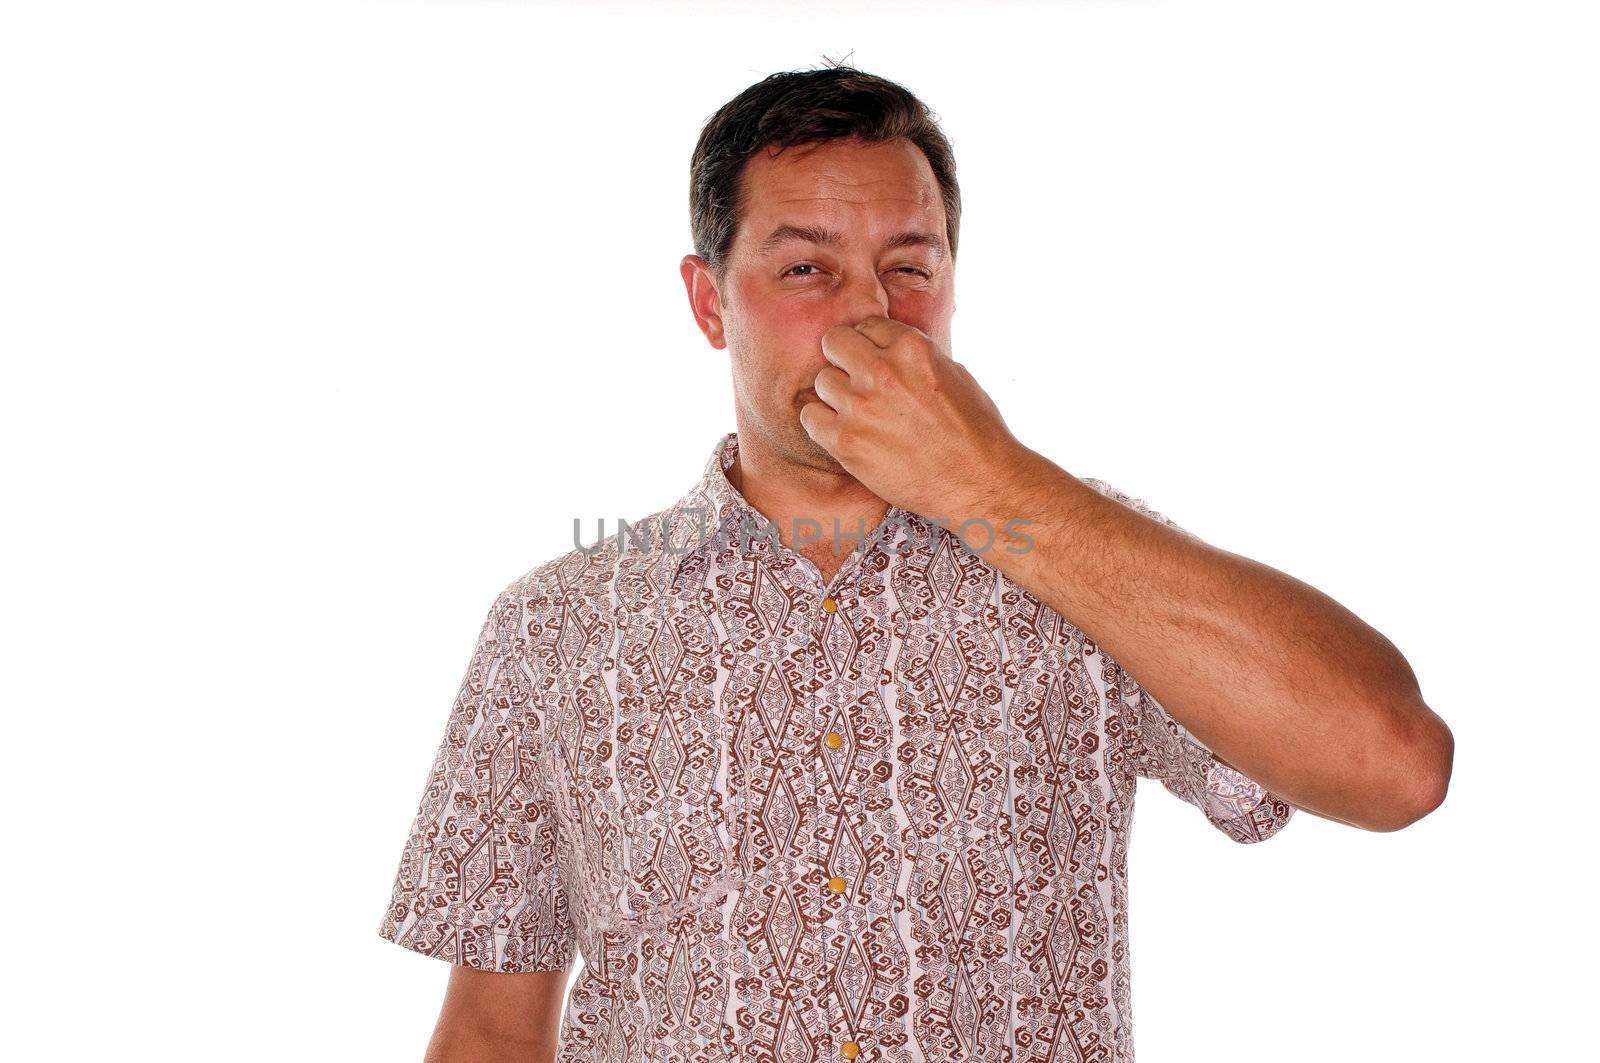 Man plugging nose after smelling a very bad stench